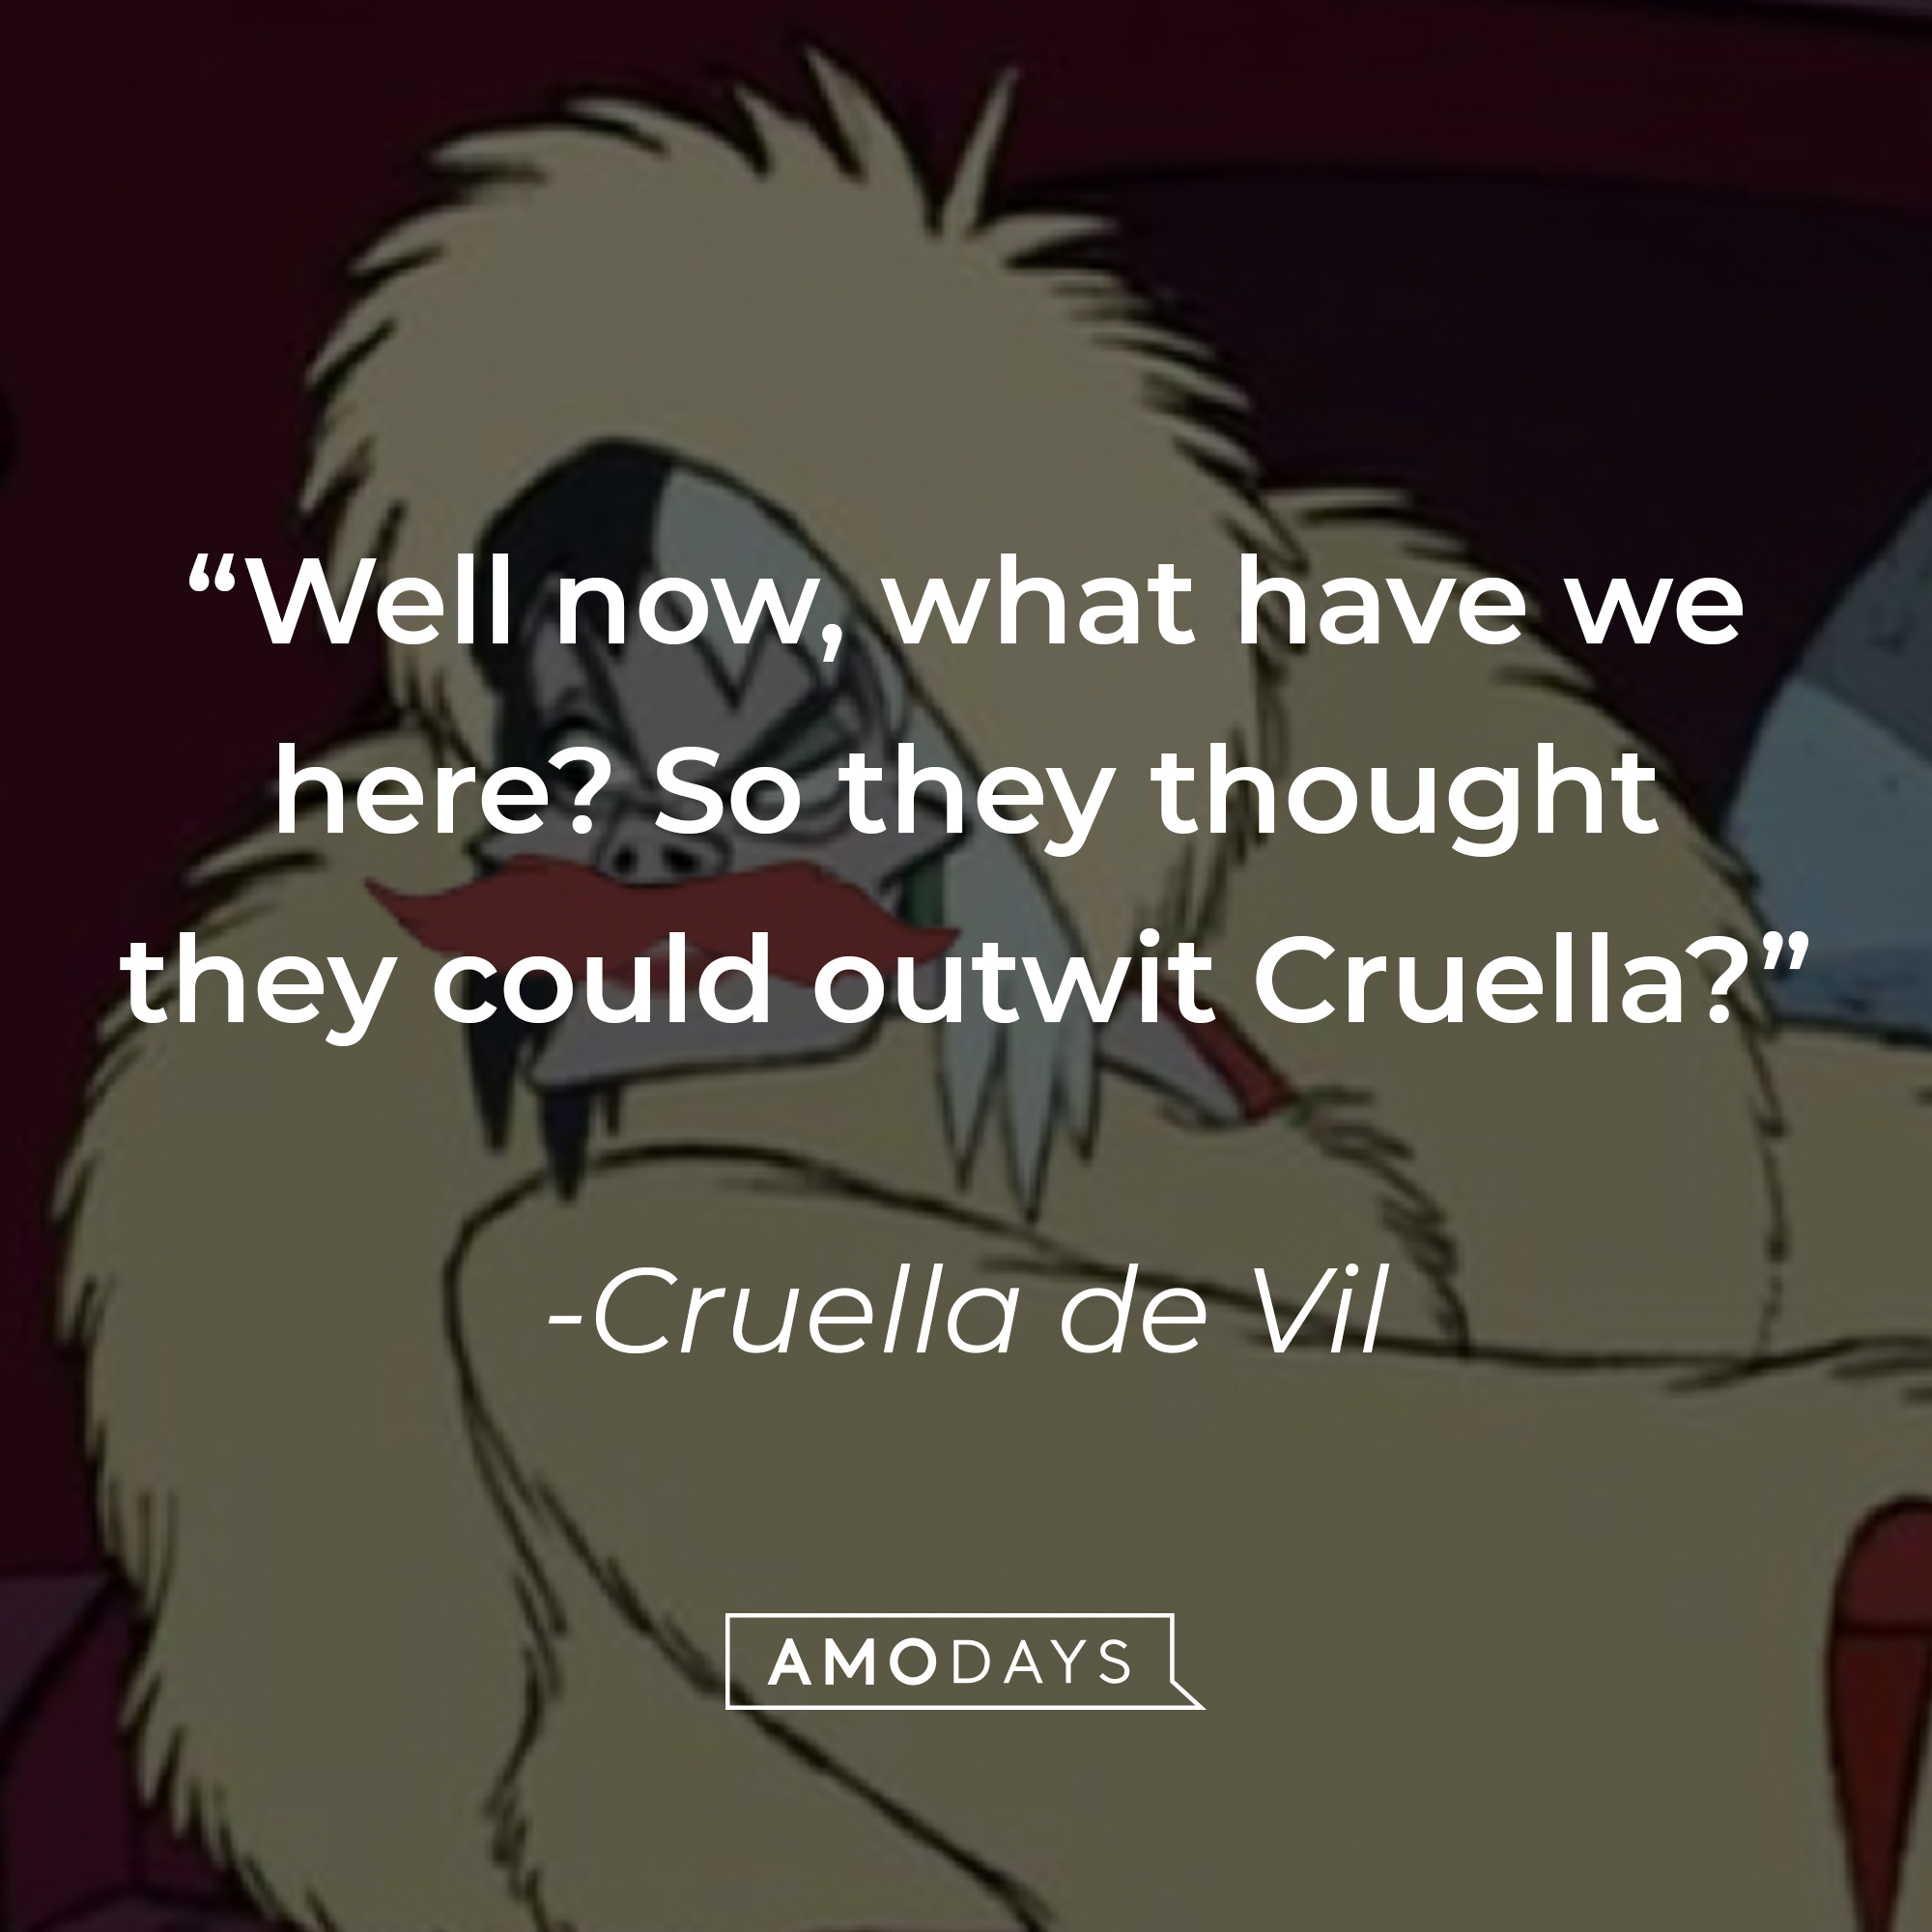 An image of the animated Cruella de Vil, with her quote: “Well now, what have we here? So they thought they could outwit Cruella?” | Source: Facebook.com/DisneyCruellaDeVil